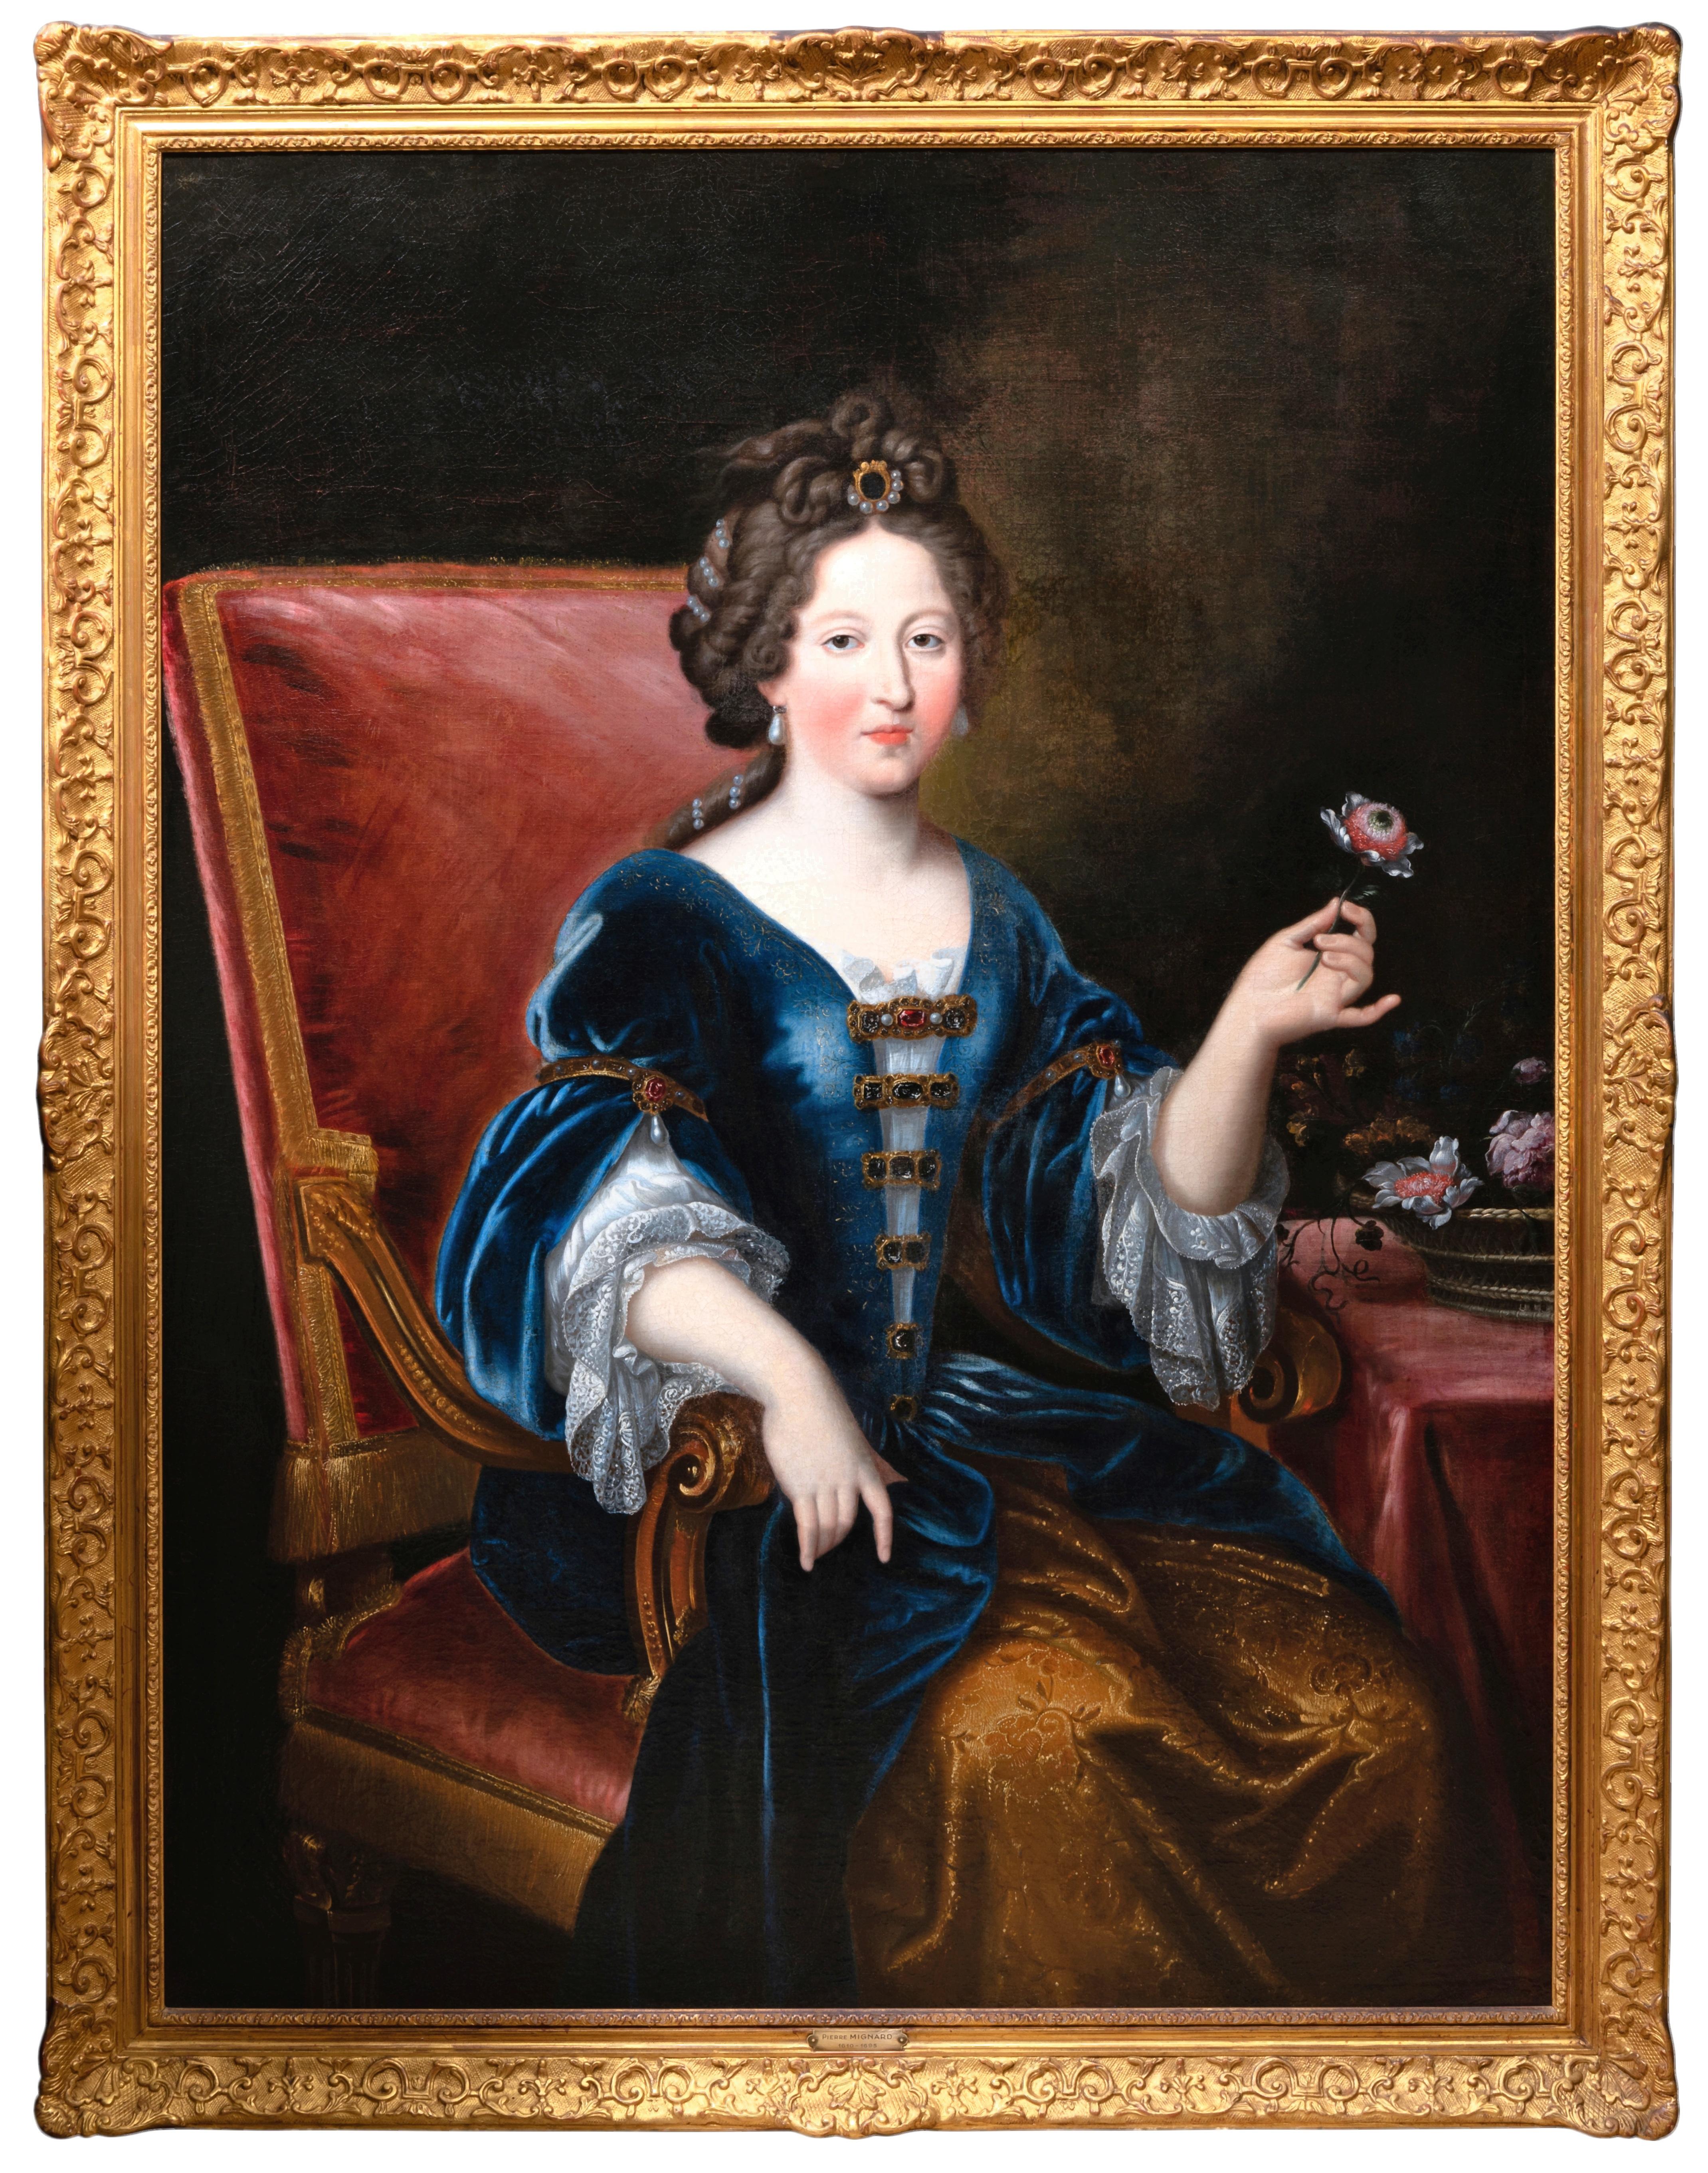 Pierre Mignard Portrait Painting - 17th c. French school, French Princess Marie-Louise d'Orleans, attr. P. Mignard